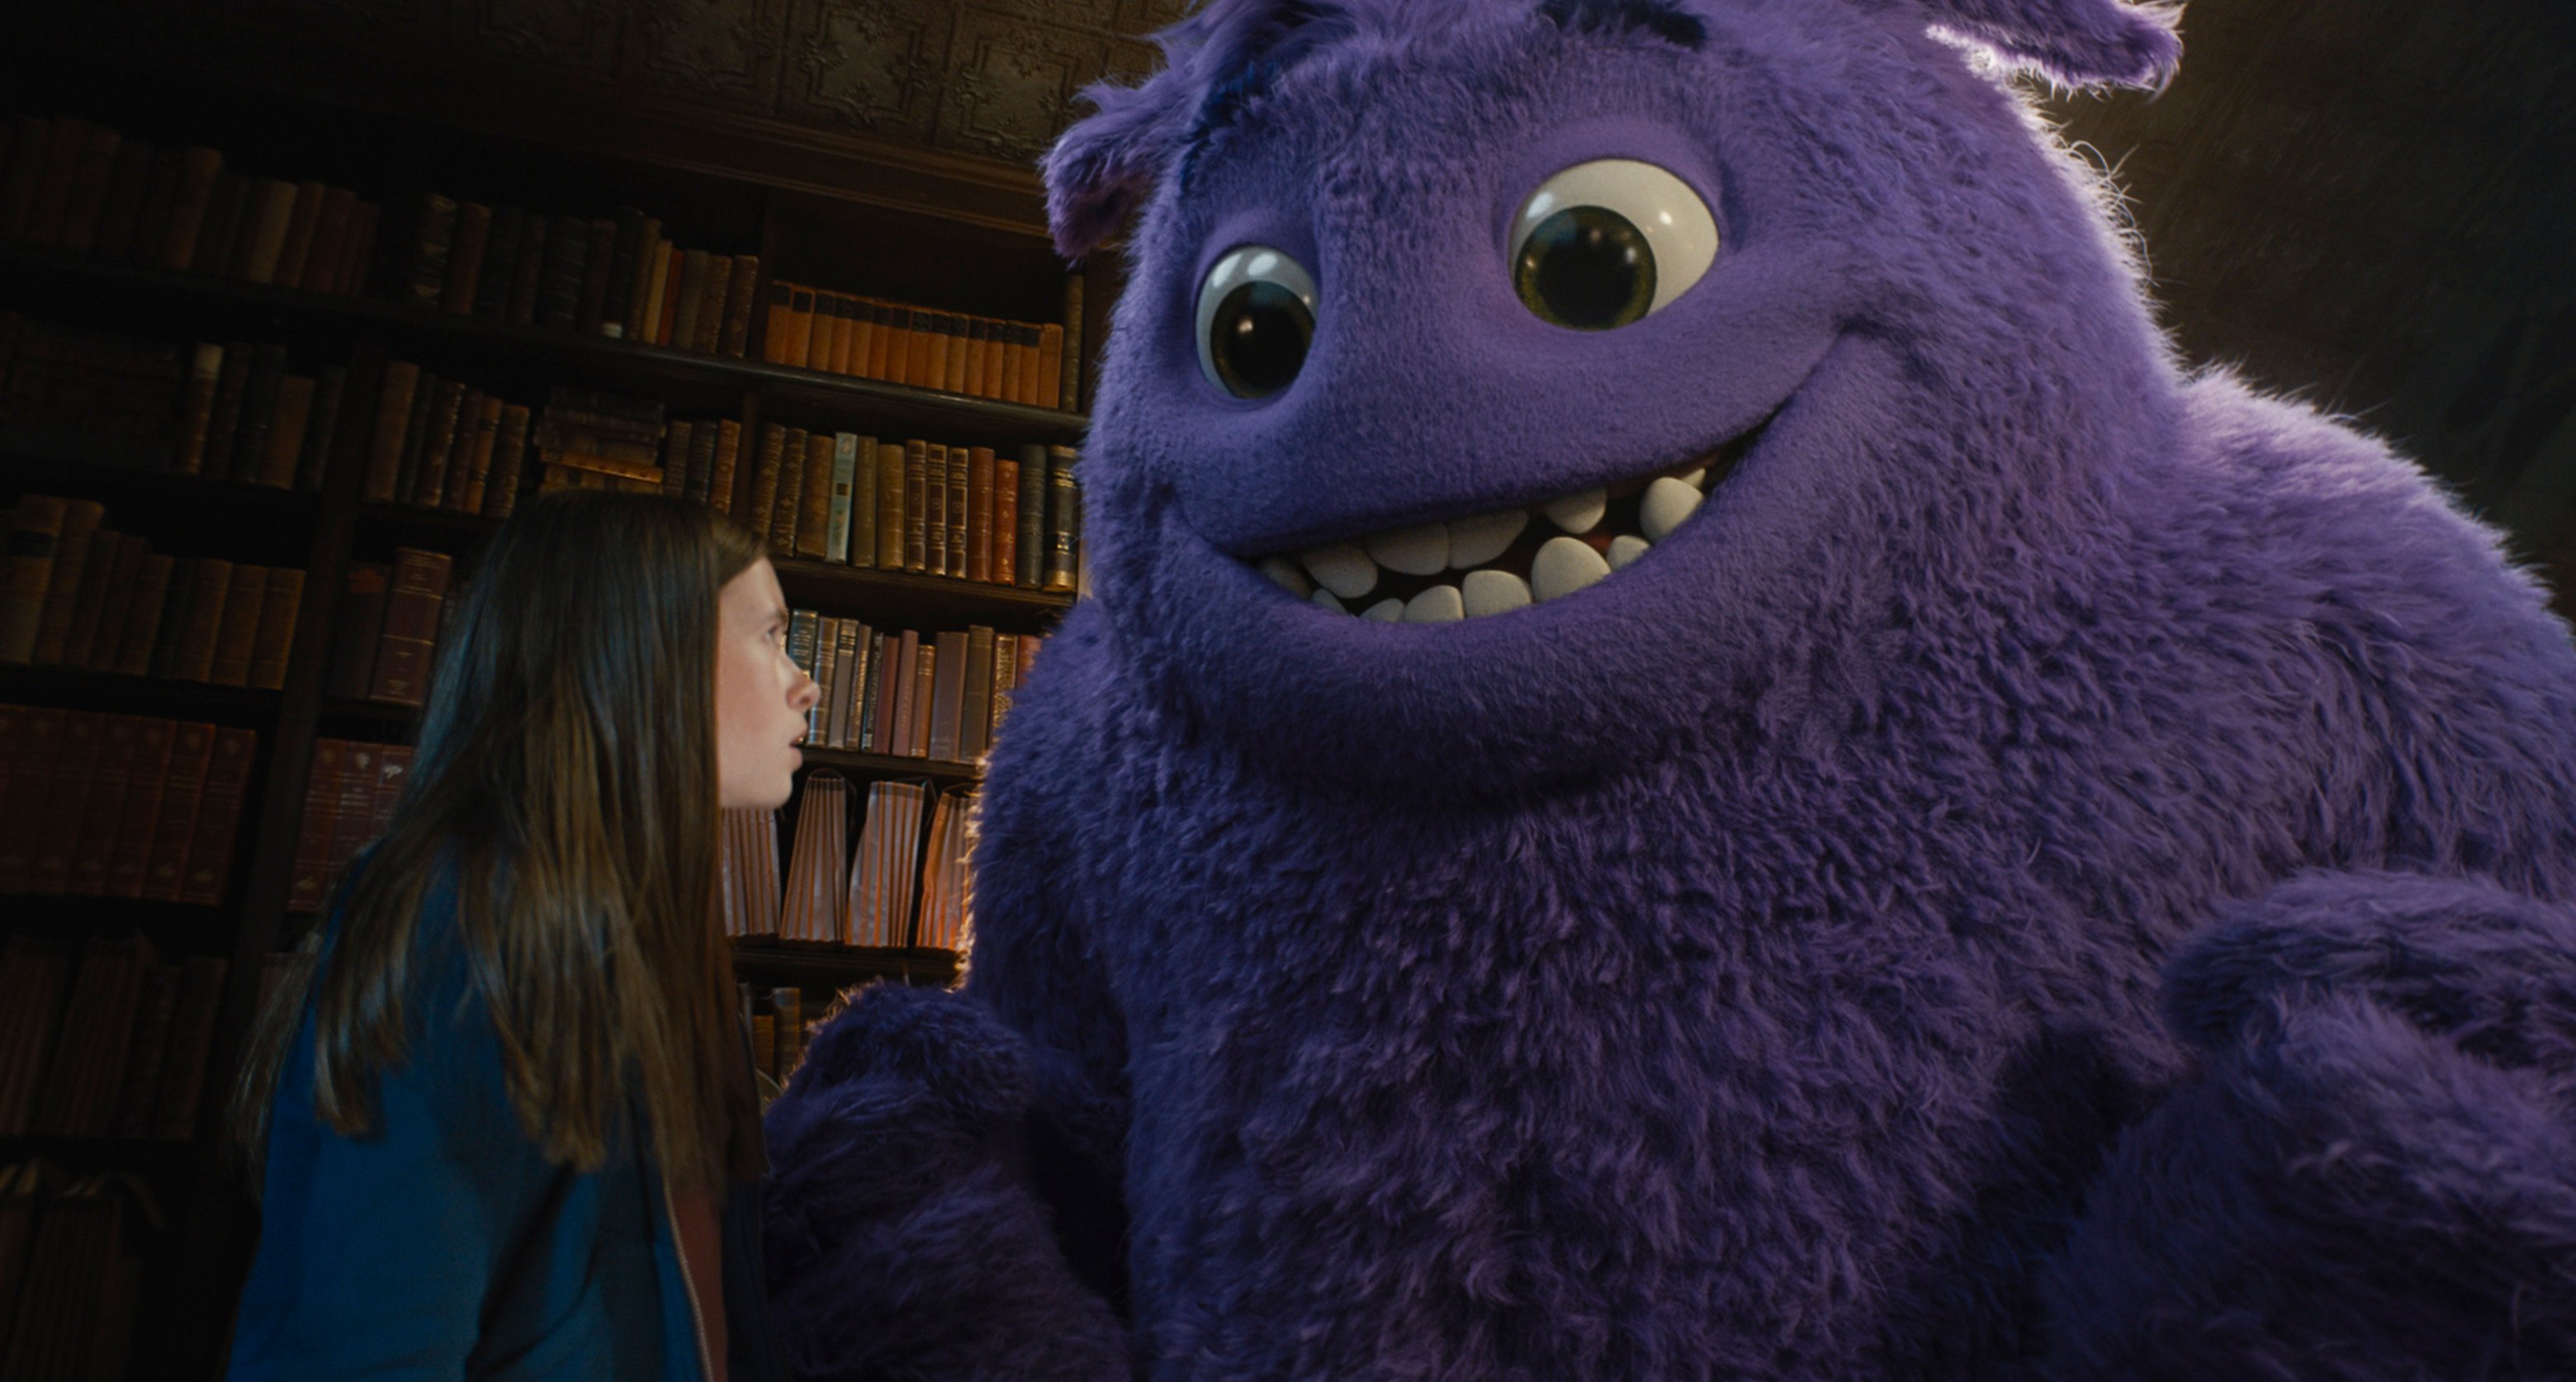 Cailey Fleming and Blue (voiced by Steve Carell) in a still from IF.